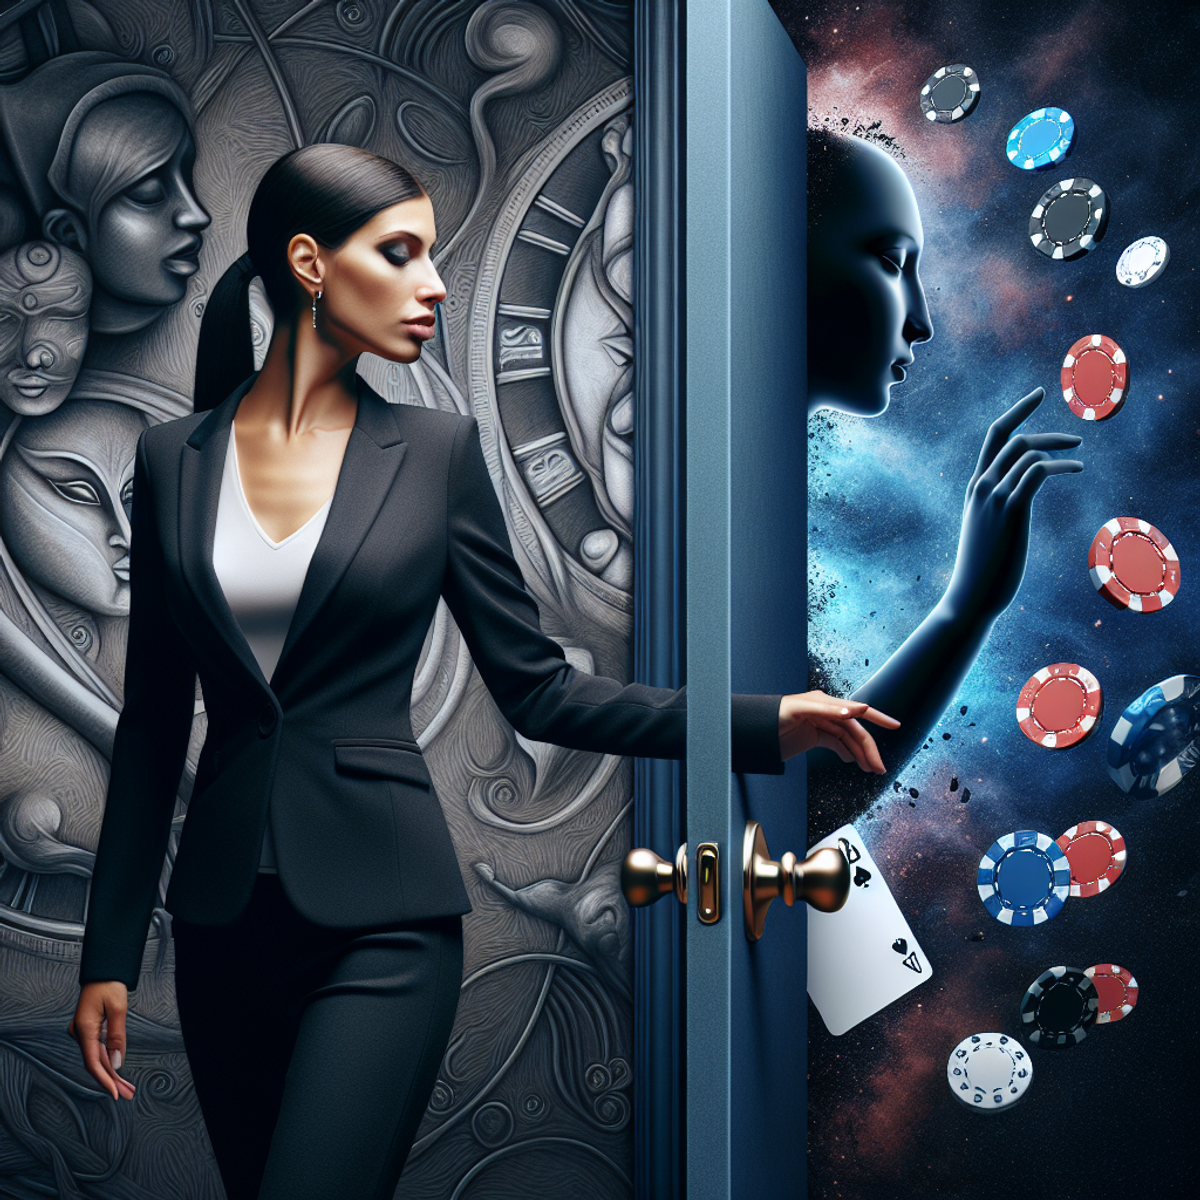 A Black woman in a professional outfit closing a solid door in a suggestive gaming environment with subtle elements of chips, dice, and cards in the b